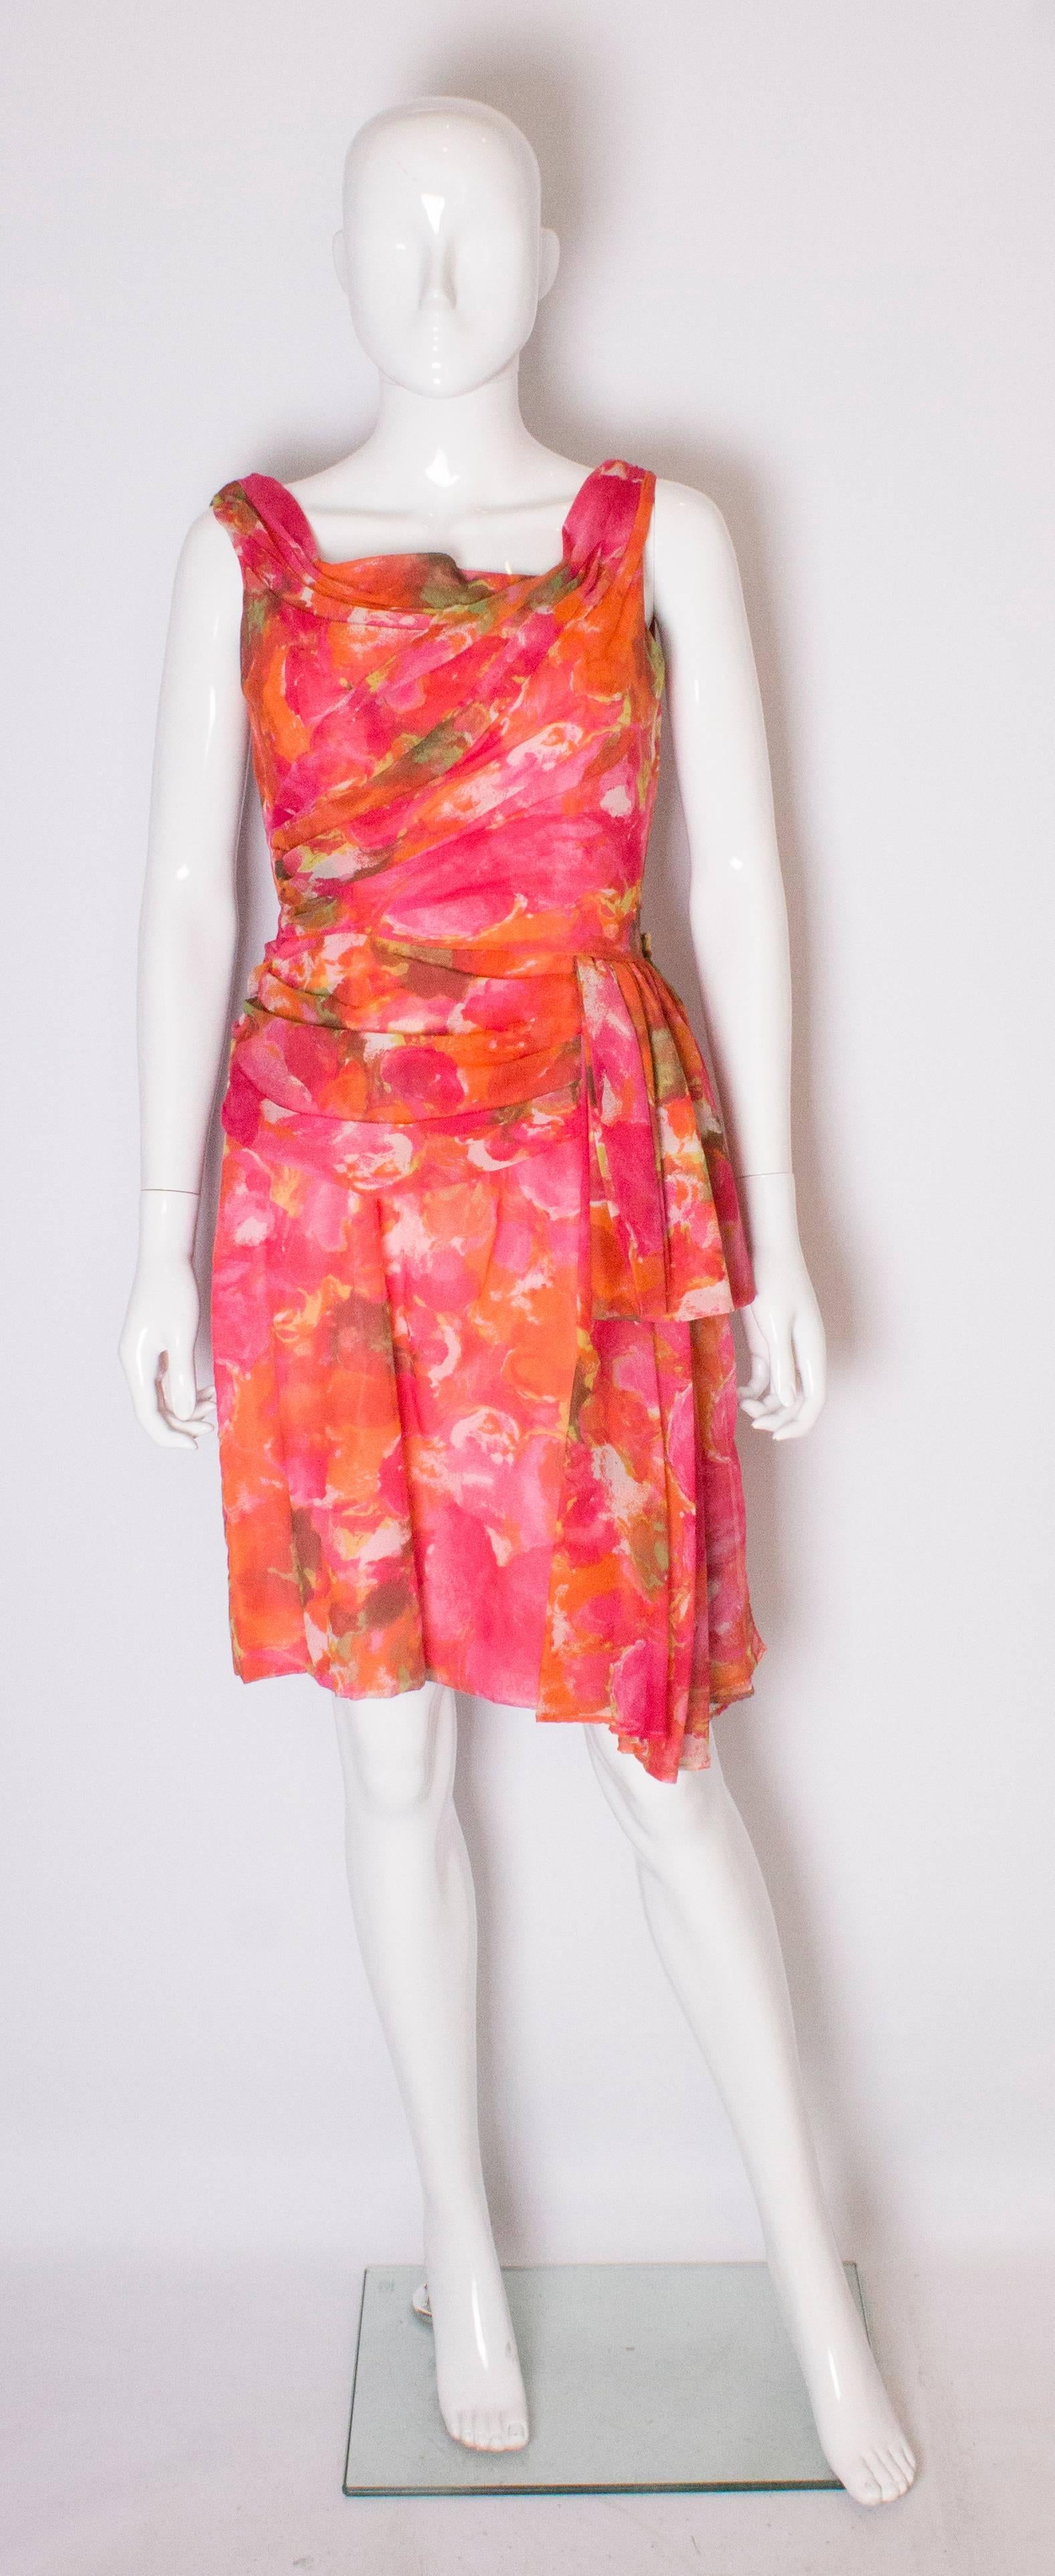 A pretty cocktail dress by London Town , Mayfair.  The dress is a colourful mix of pinks ,orange and red. It has drapes at the front and back and ties at the waist. It has a central back zip, and 3''hem.

